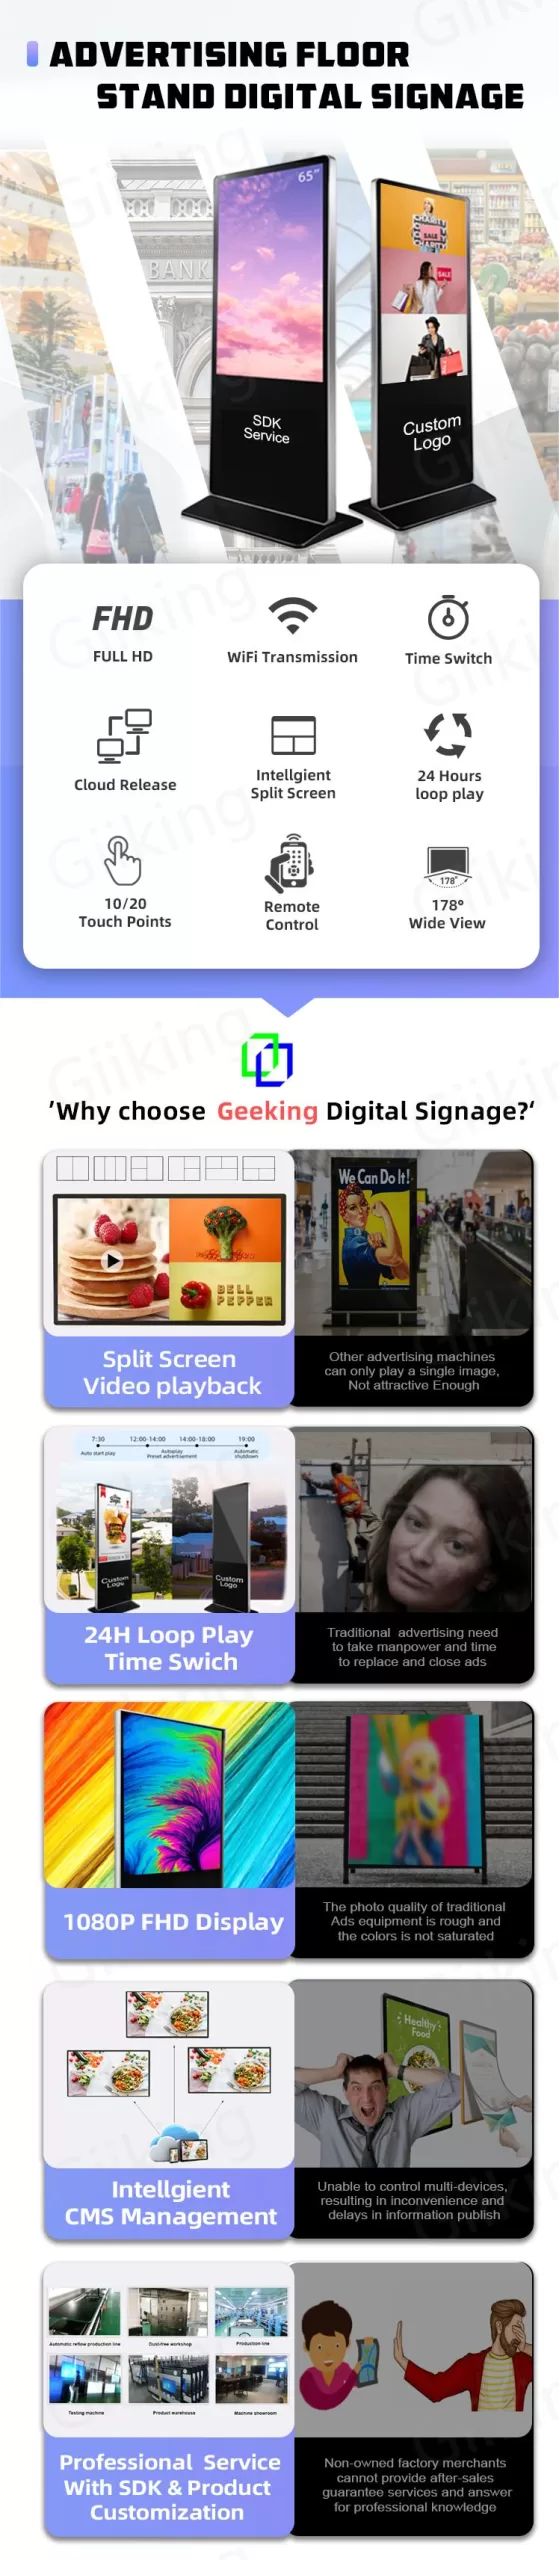 Kiosk digital sigange-floor stand signage-floor standing digital signage display-main featrues and different from the traditional advertising publishing